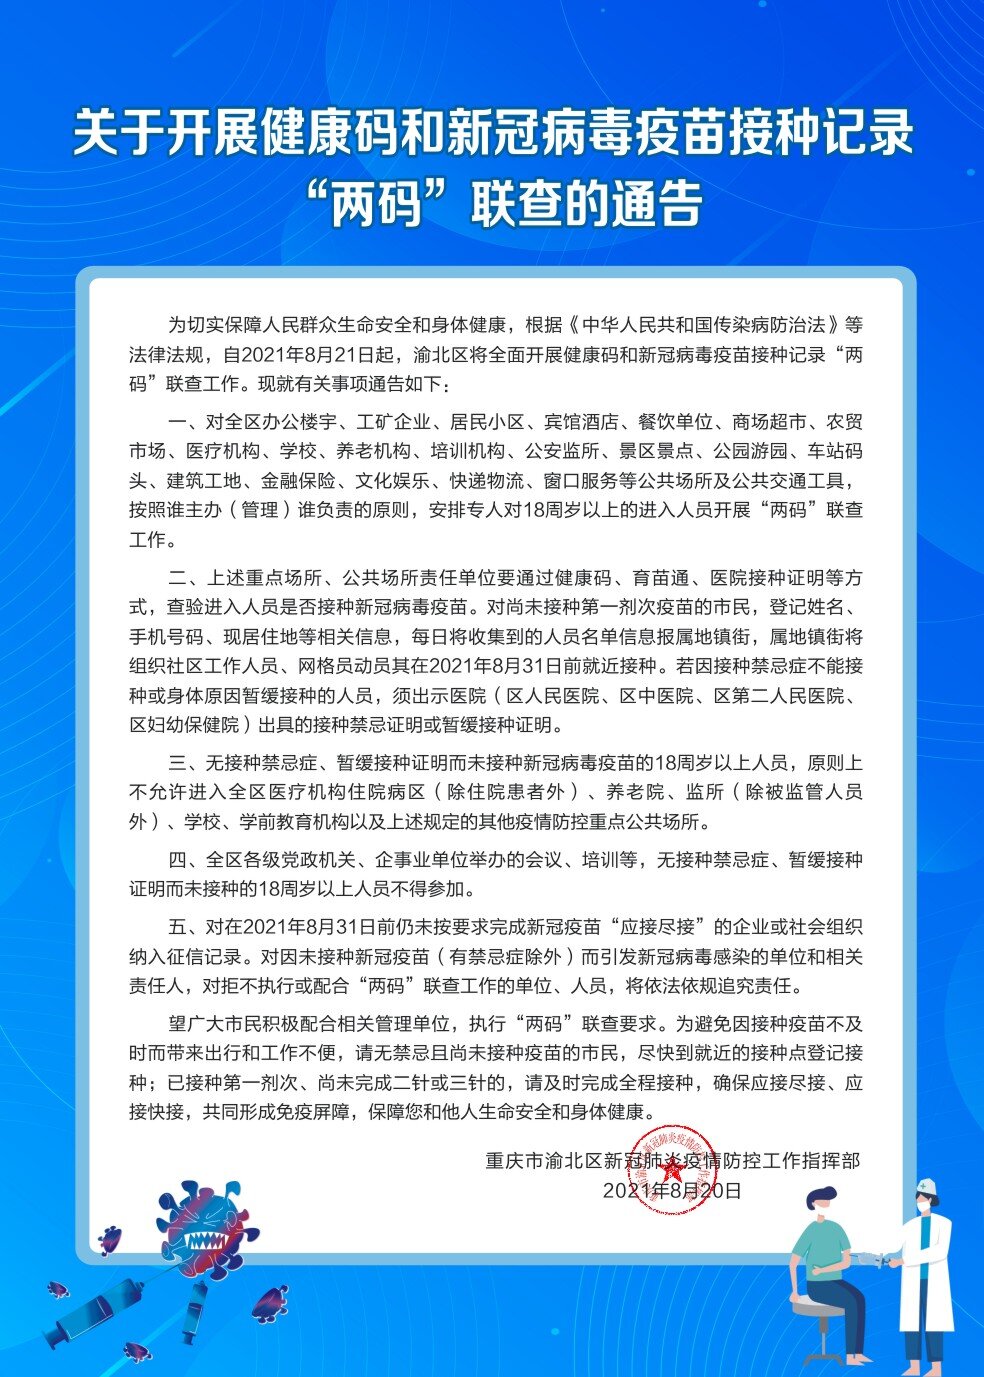 On August 20, Yubei District of Chongqing City issued an official notice regarding checking people’s “health code” and vaccination records at all public places.